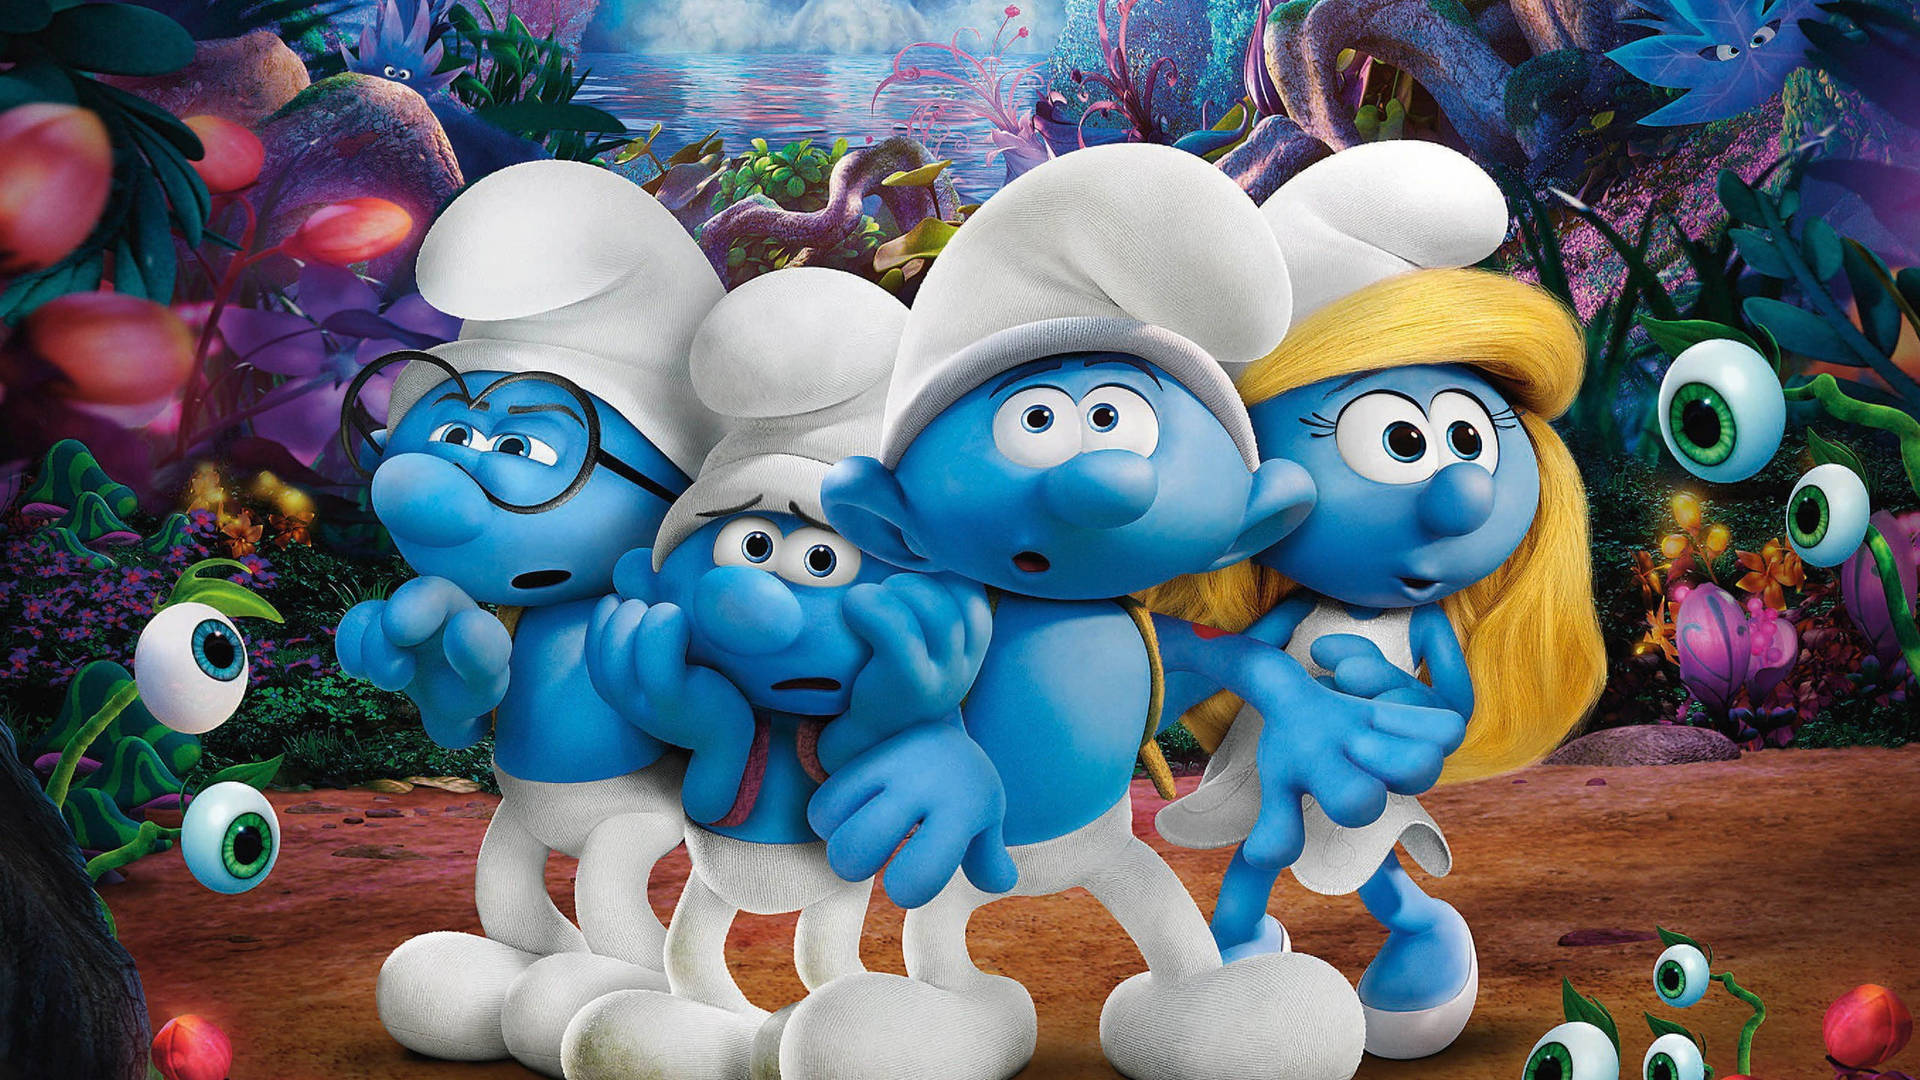 The Smurfs In The Lost Village Background